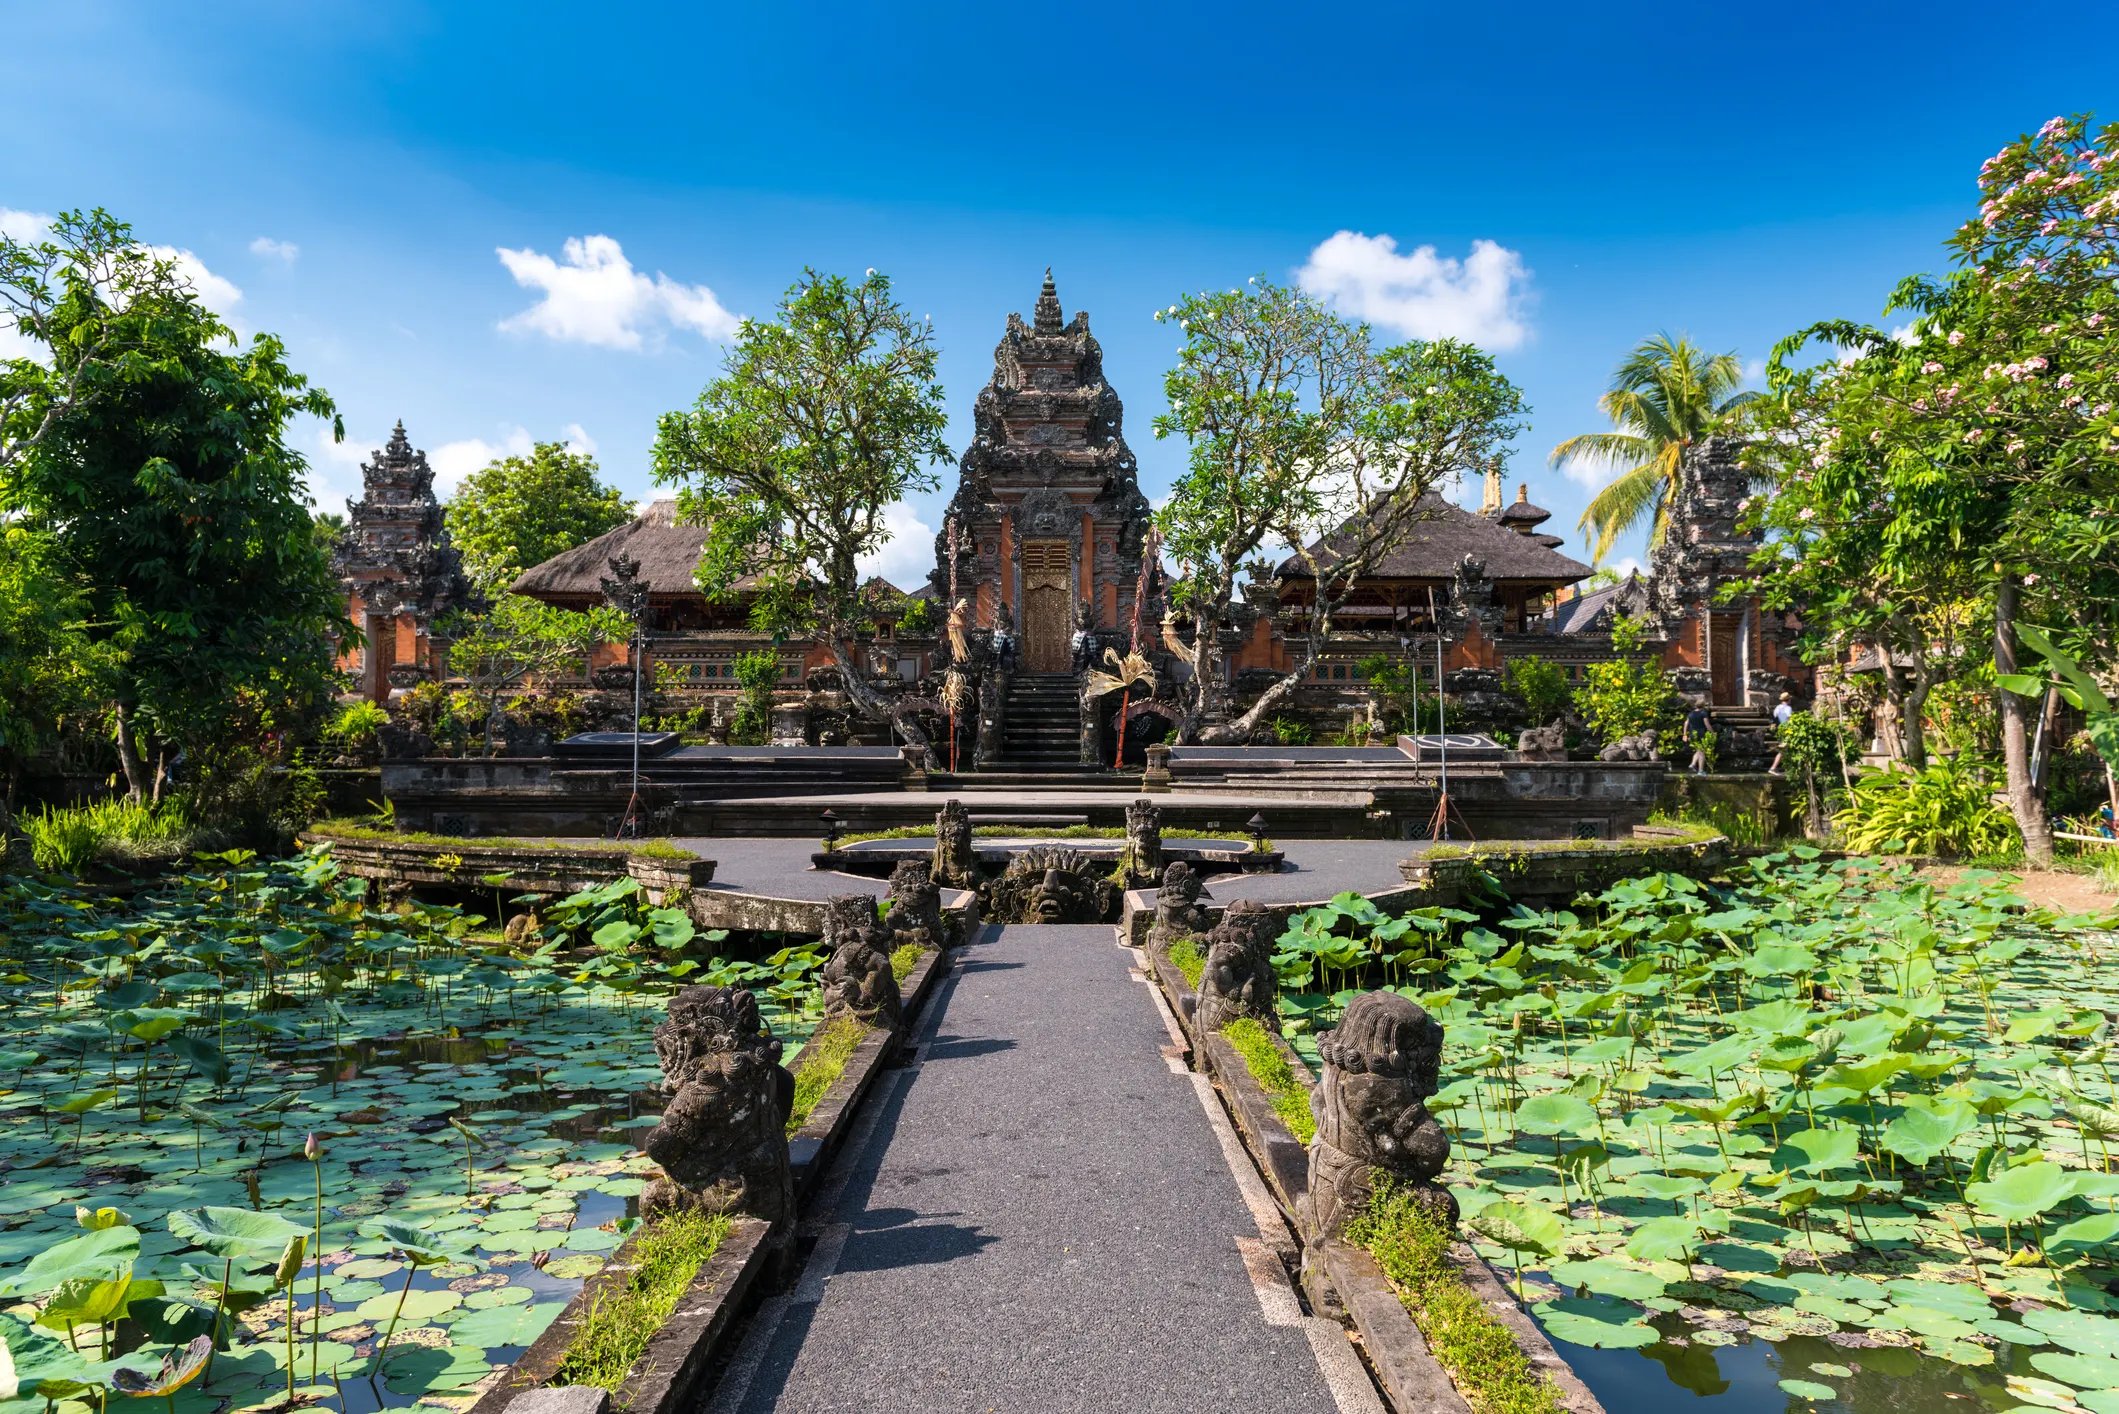 Ubud is known for being the spiritual and cultural heart of Bali.  